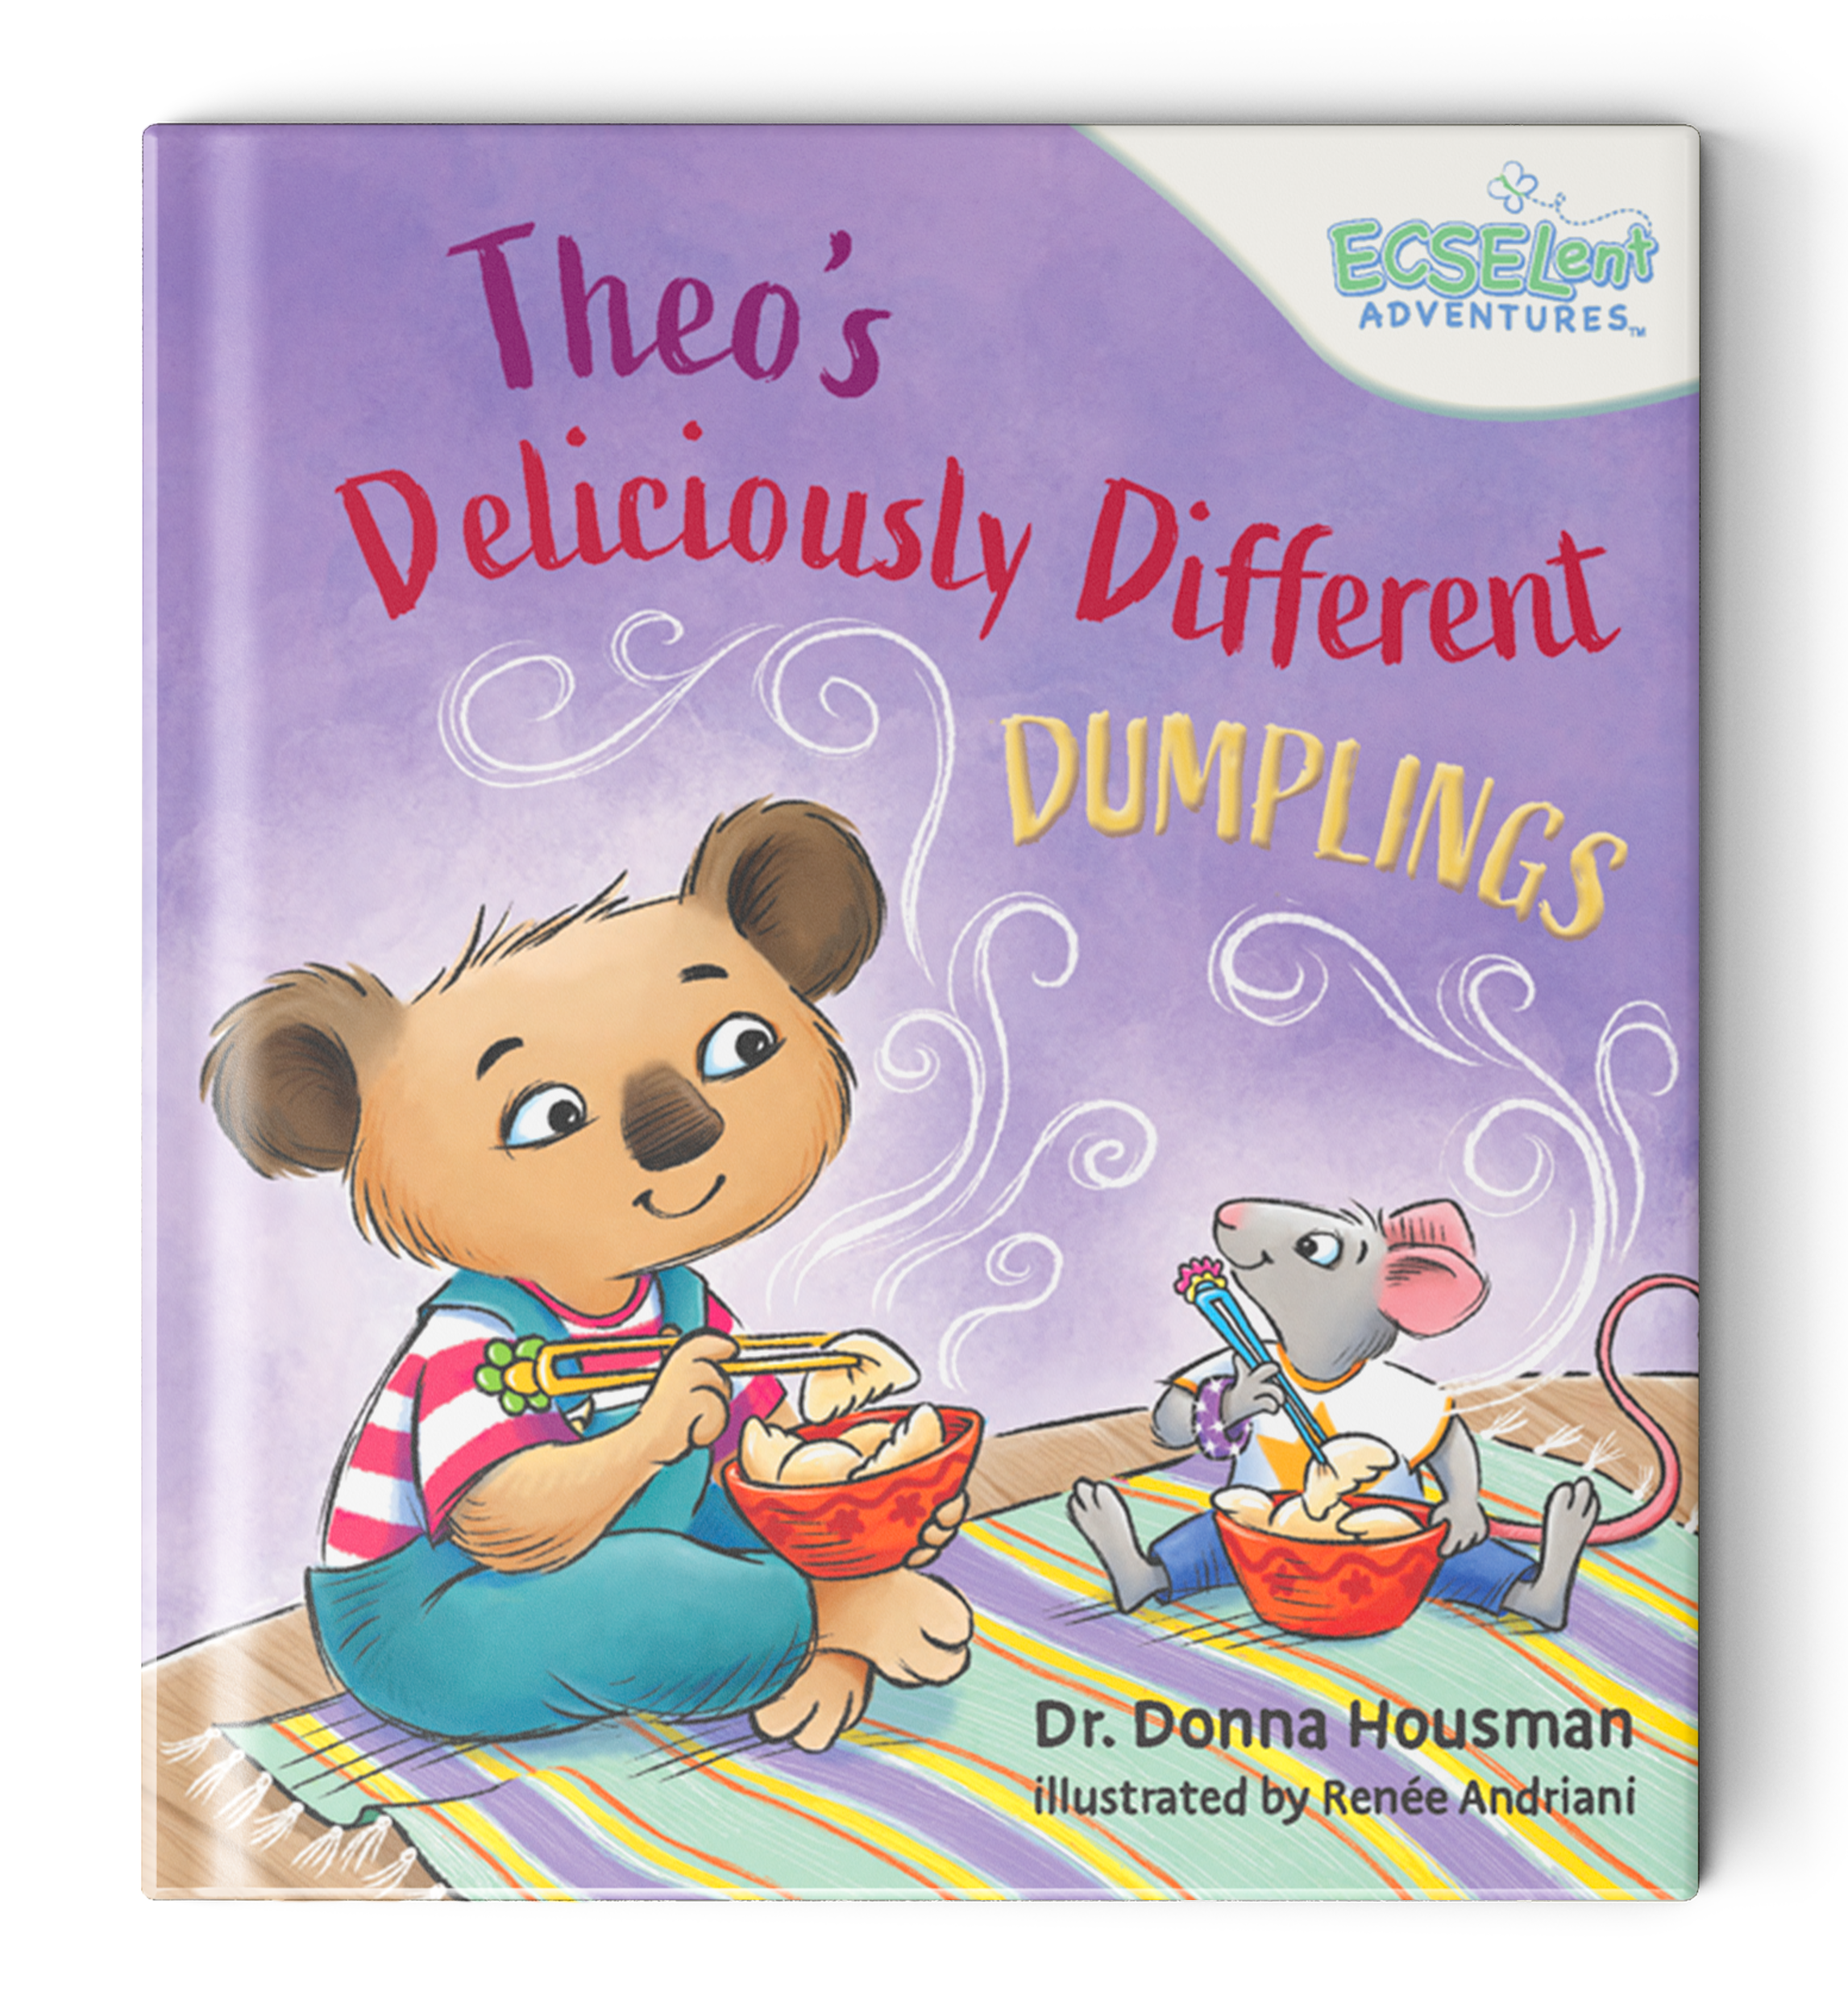 Theo's Deliciously Different Dumplings children's book about emotions surrounding differences